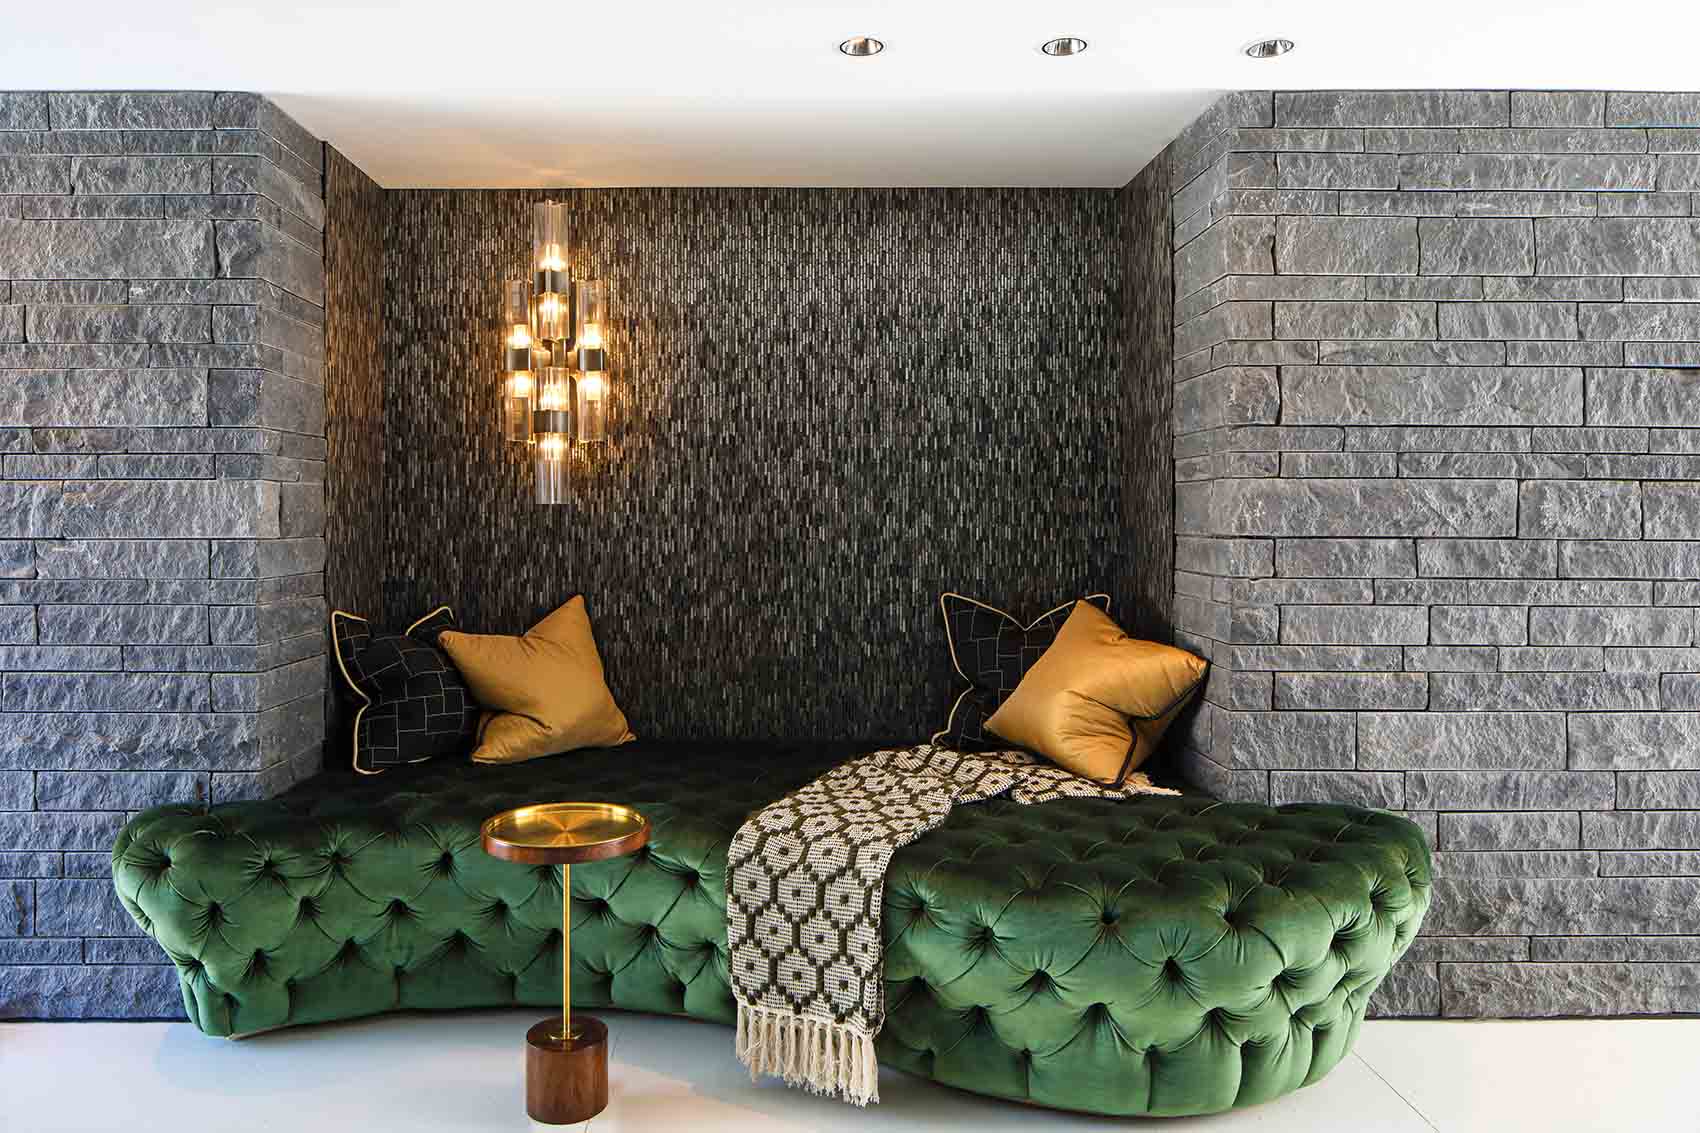 Curvaceous deep buttoned banquette in green velvet with gold scatter cushions and crystal light